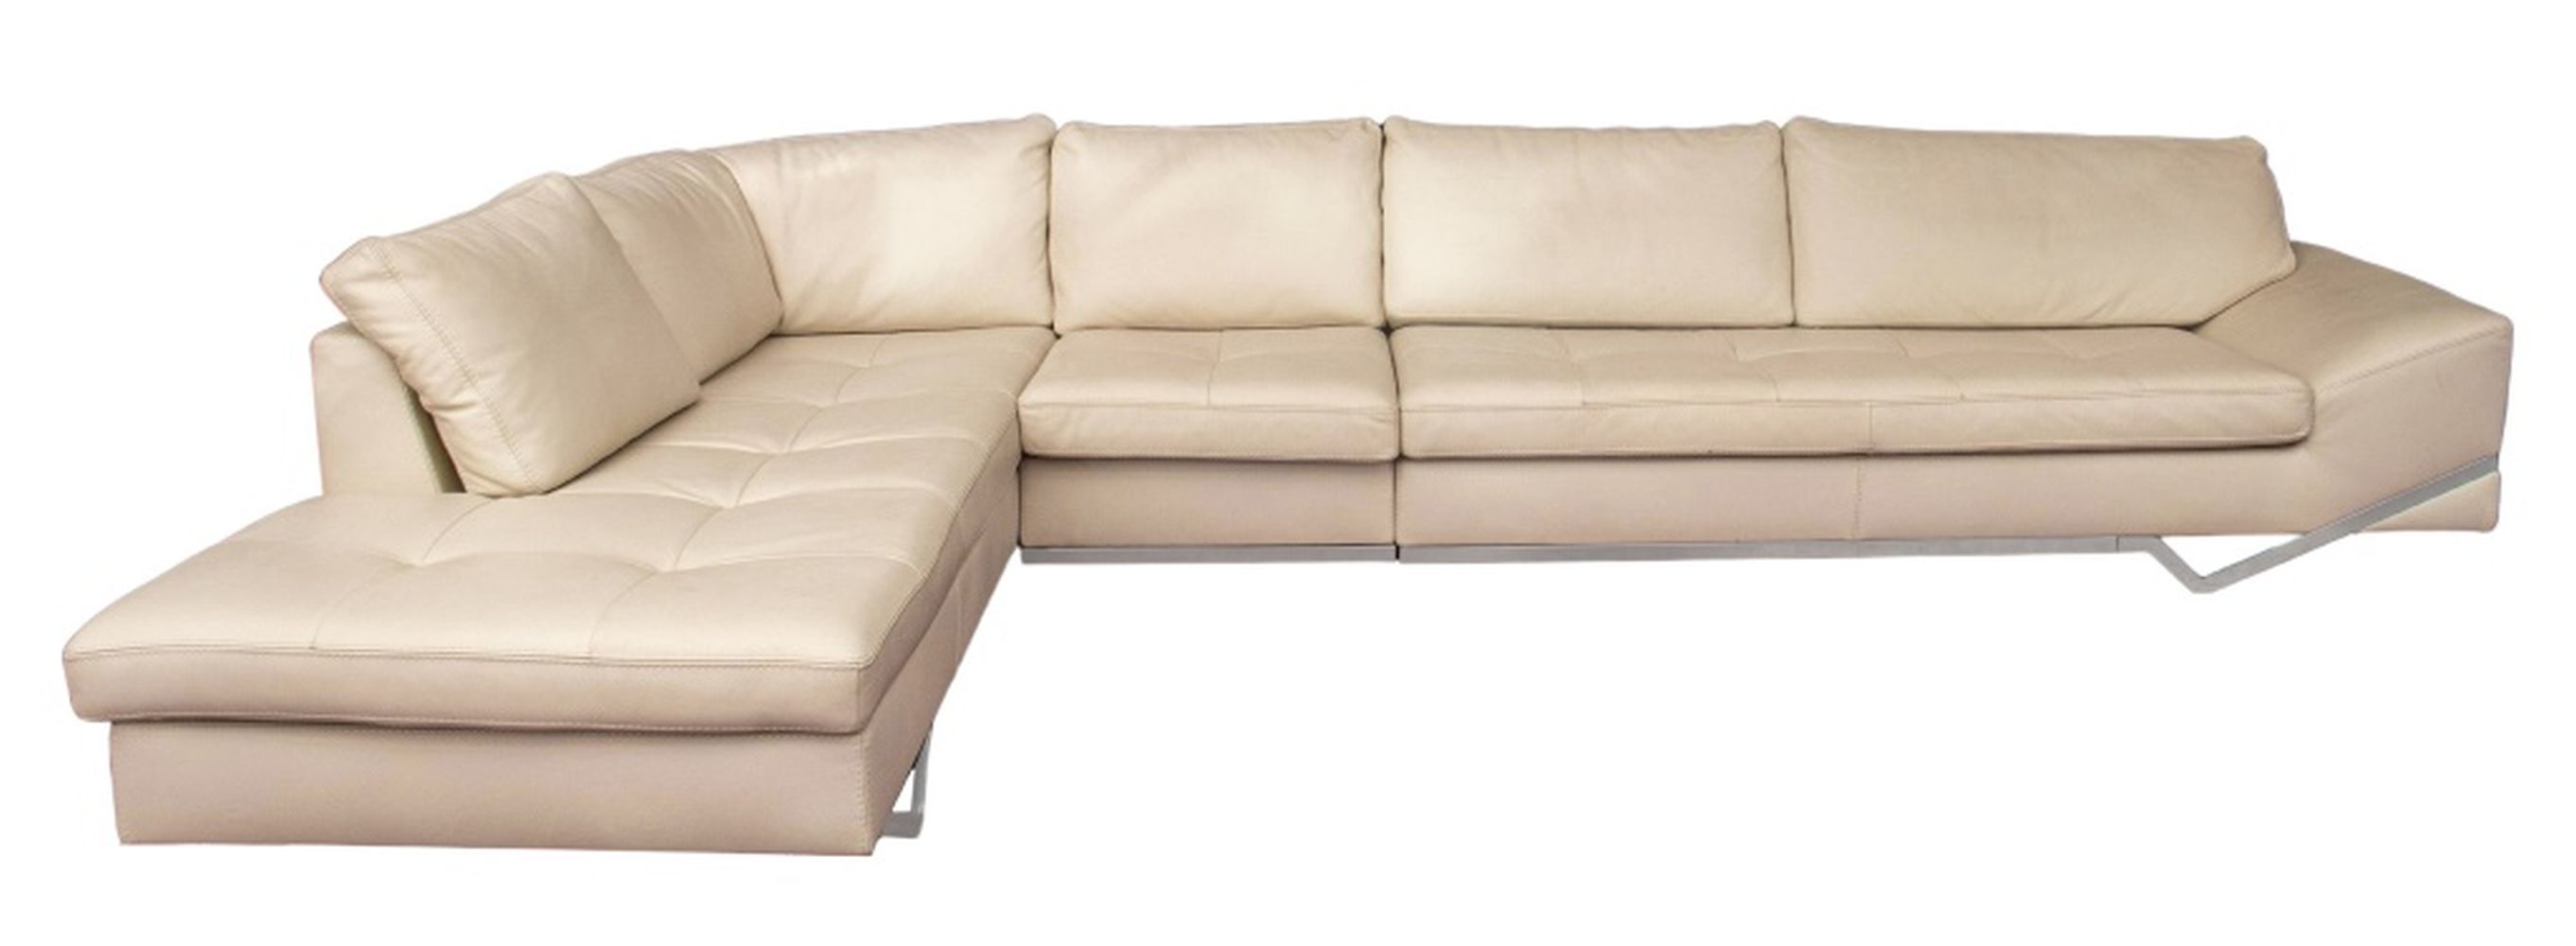 ROCHE BOBOIS BEIGE LEATHER SECTIONAL 3b4a09